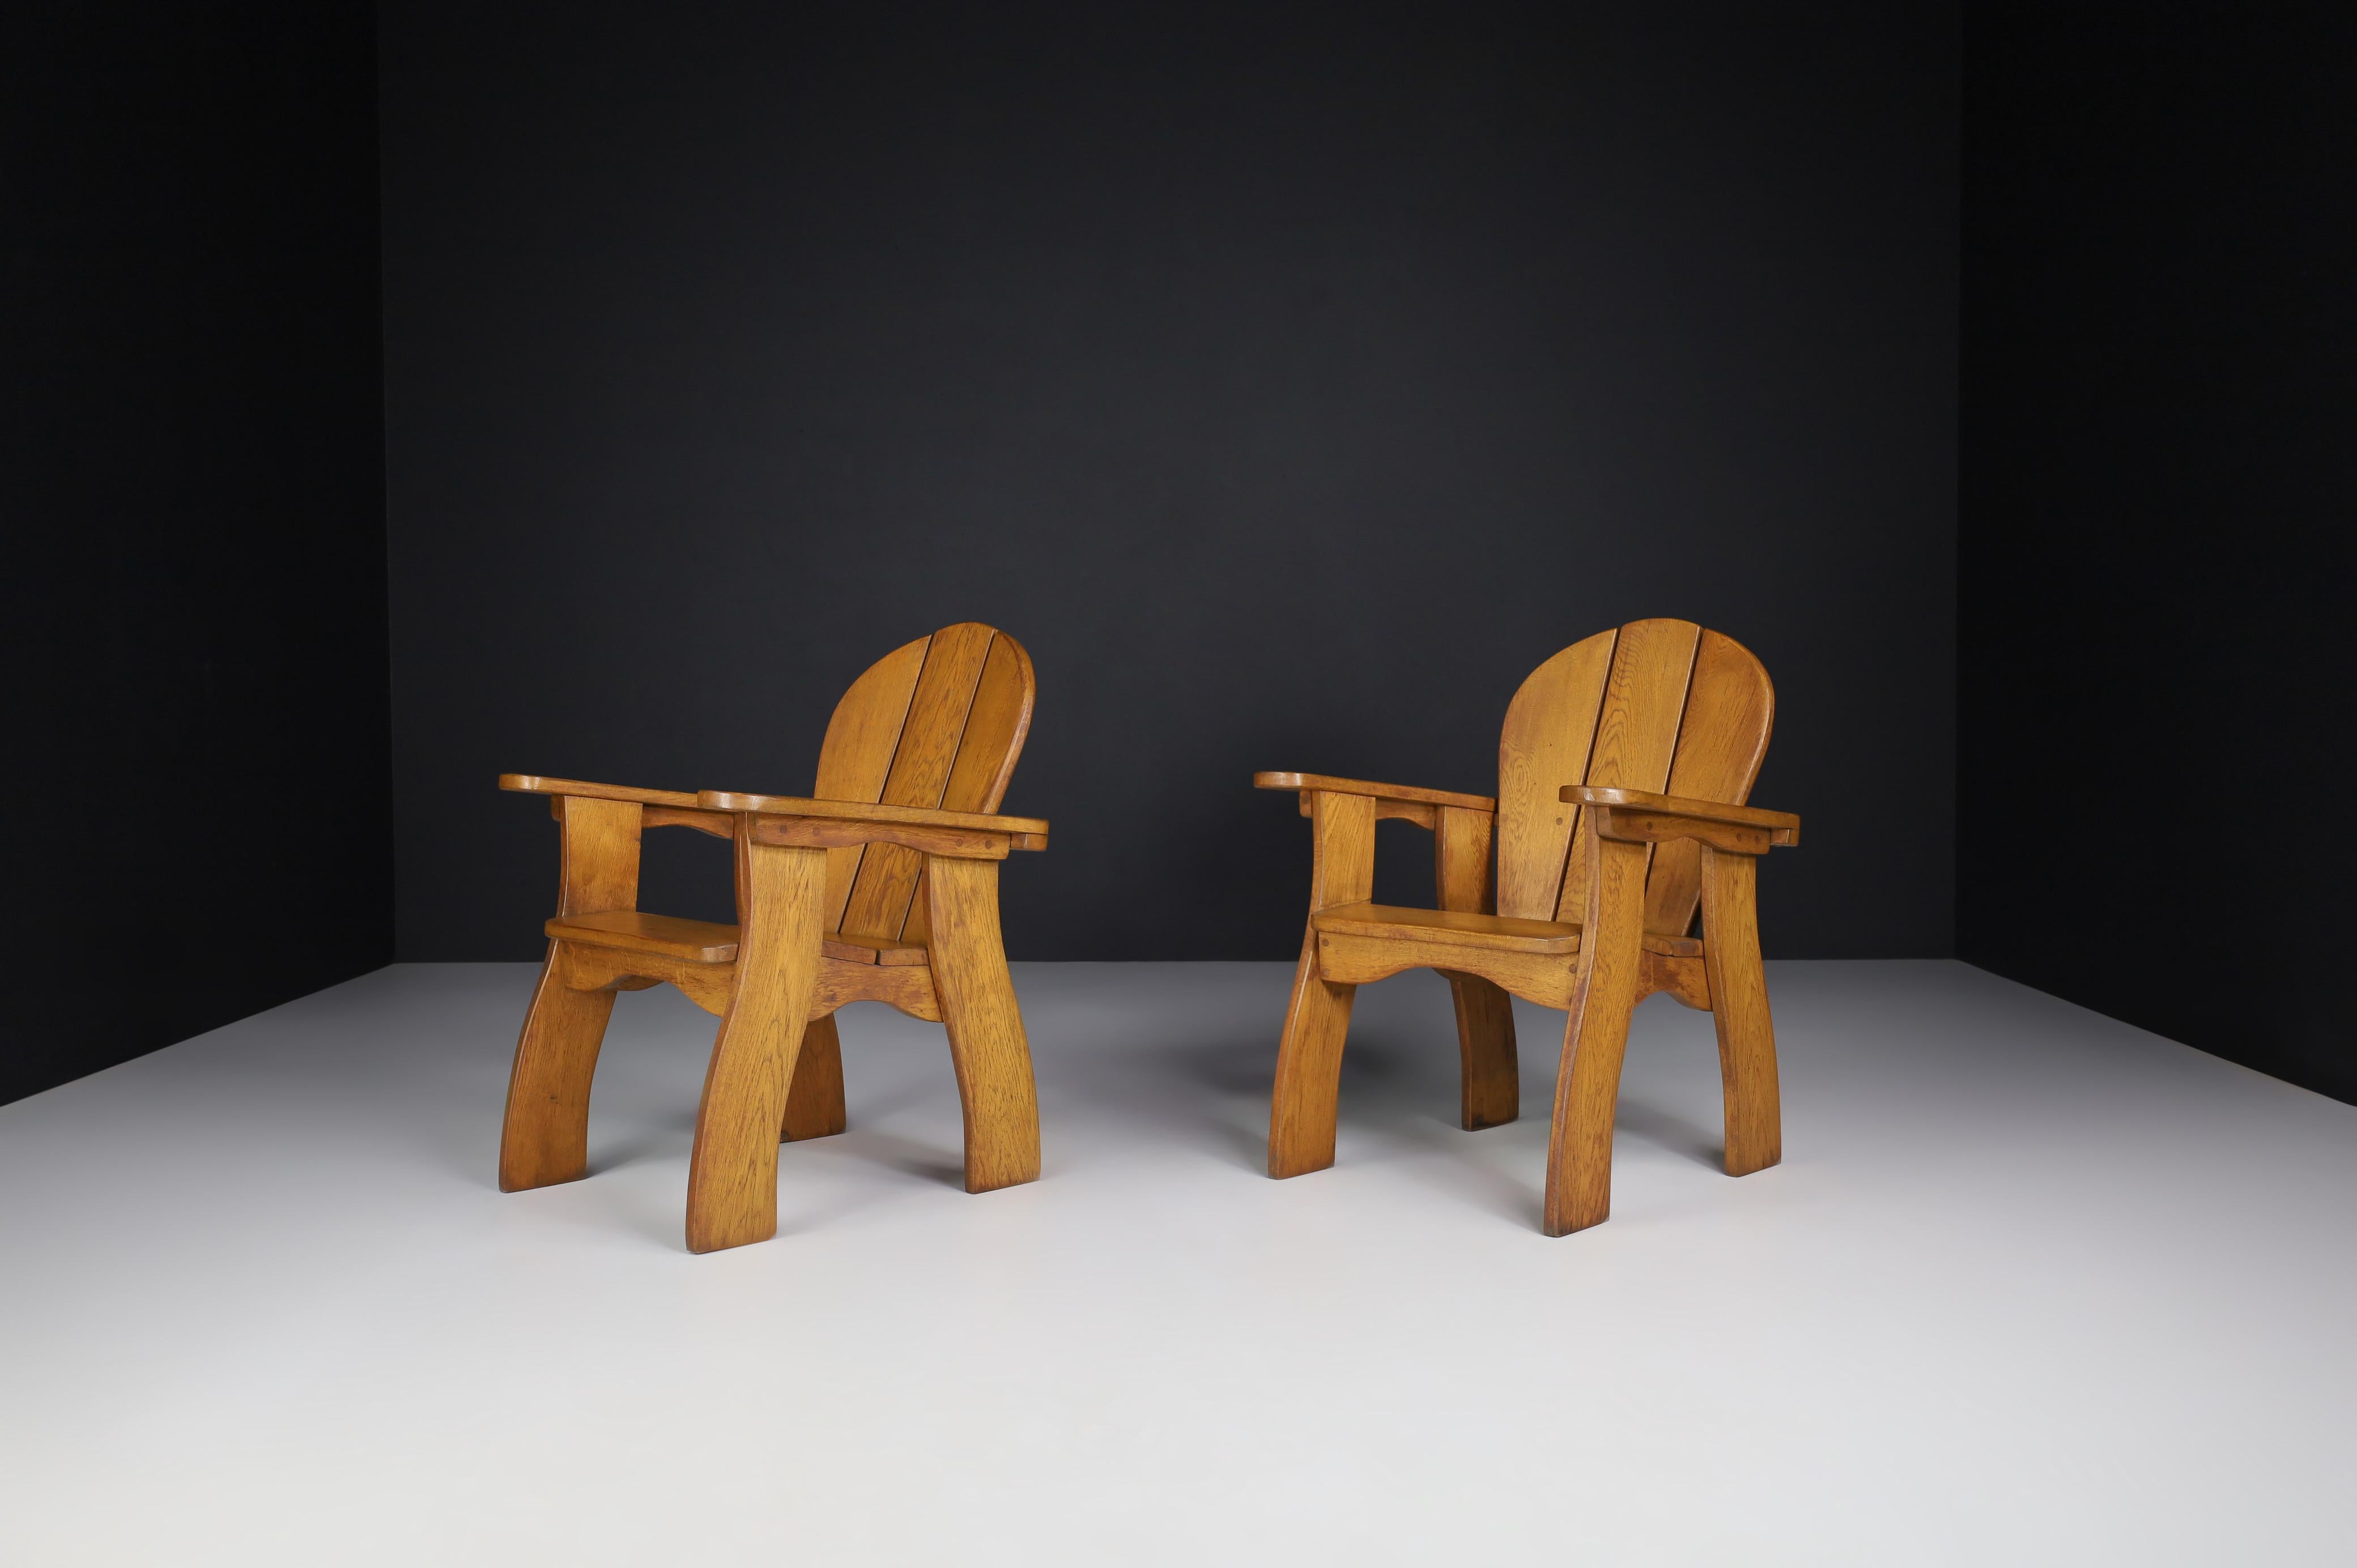 Sculptural Armchairs in Oak, France, 1960s For Sale 2